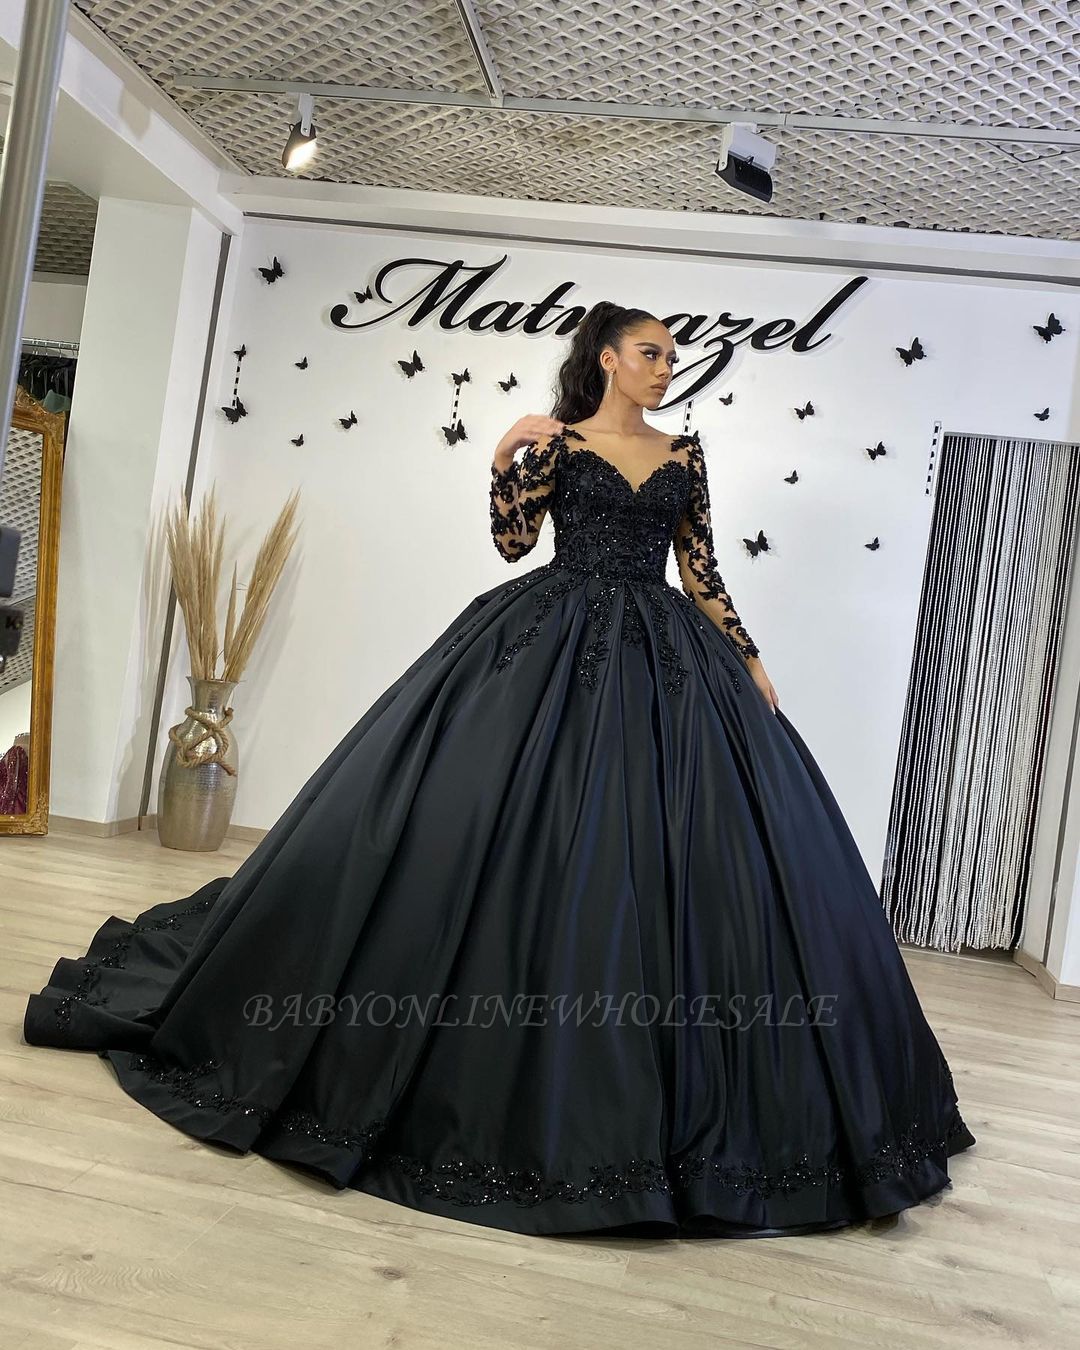 Stunning Black Lace Ball Gown Long Sleeves Floral Dancing Party Dress ...